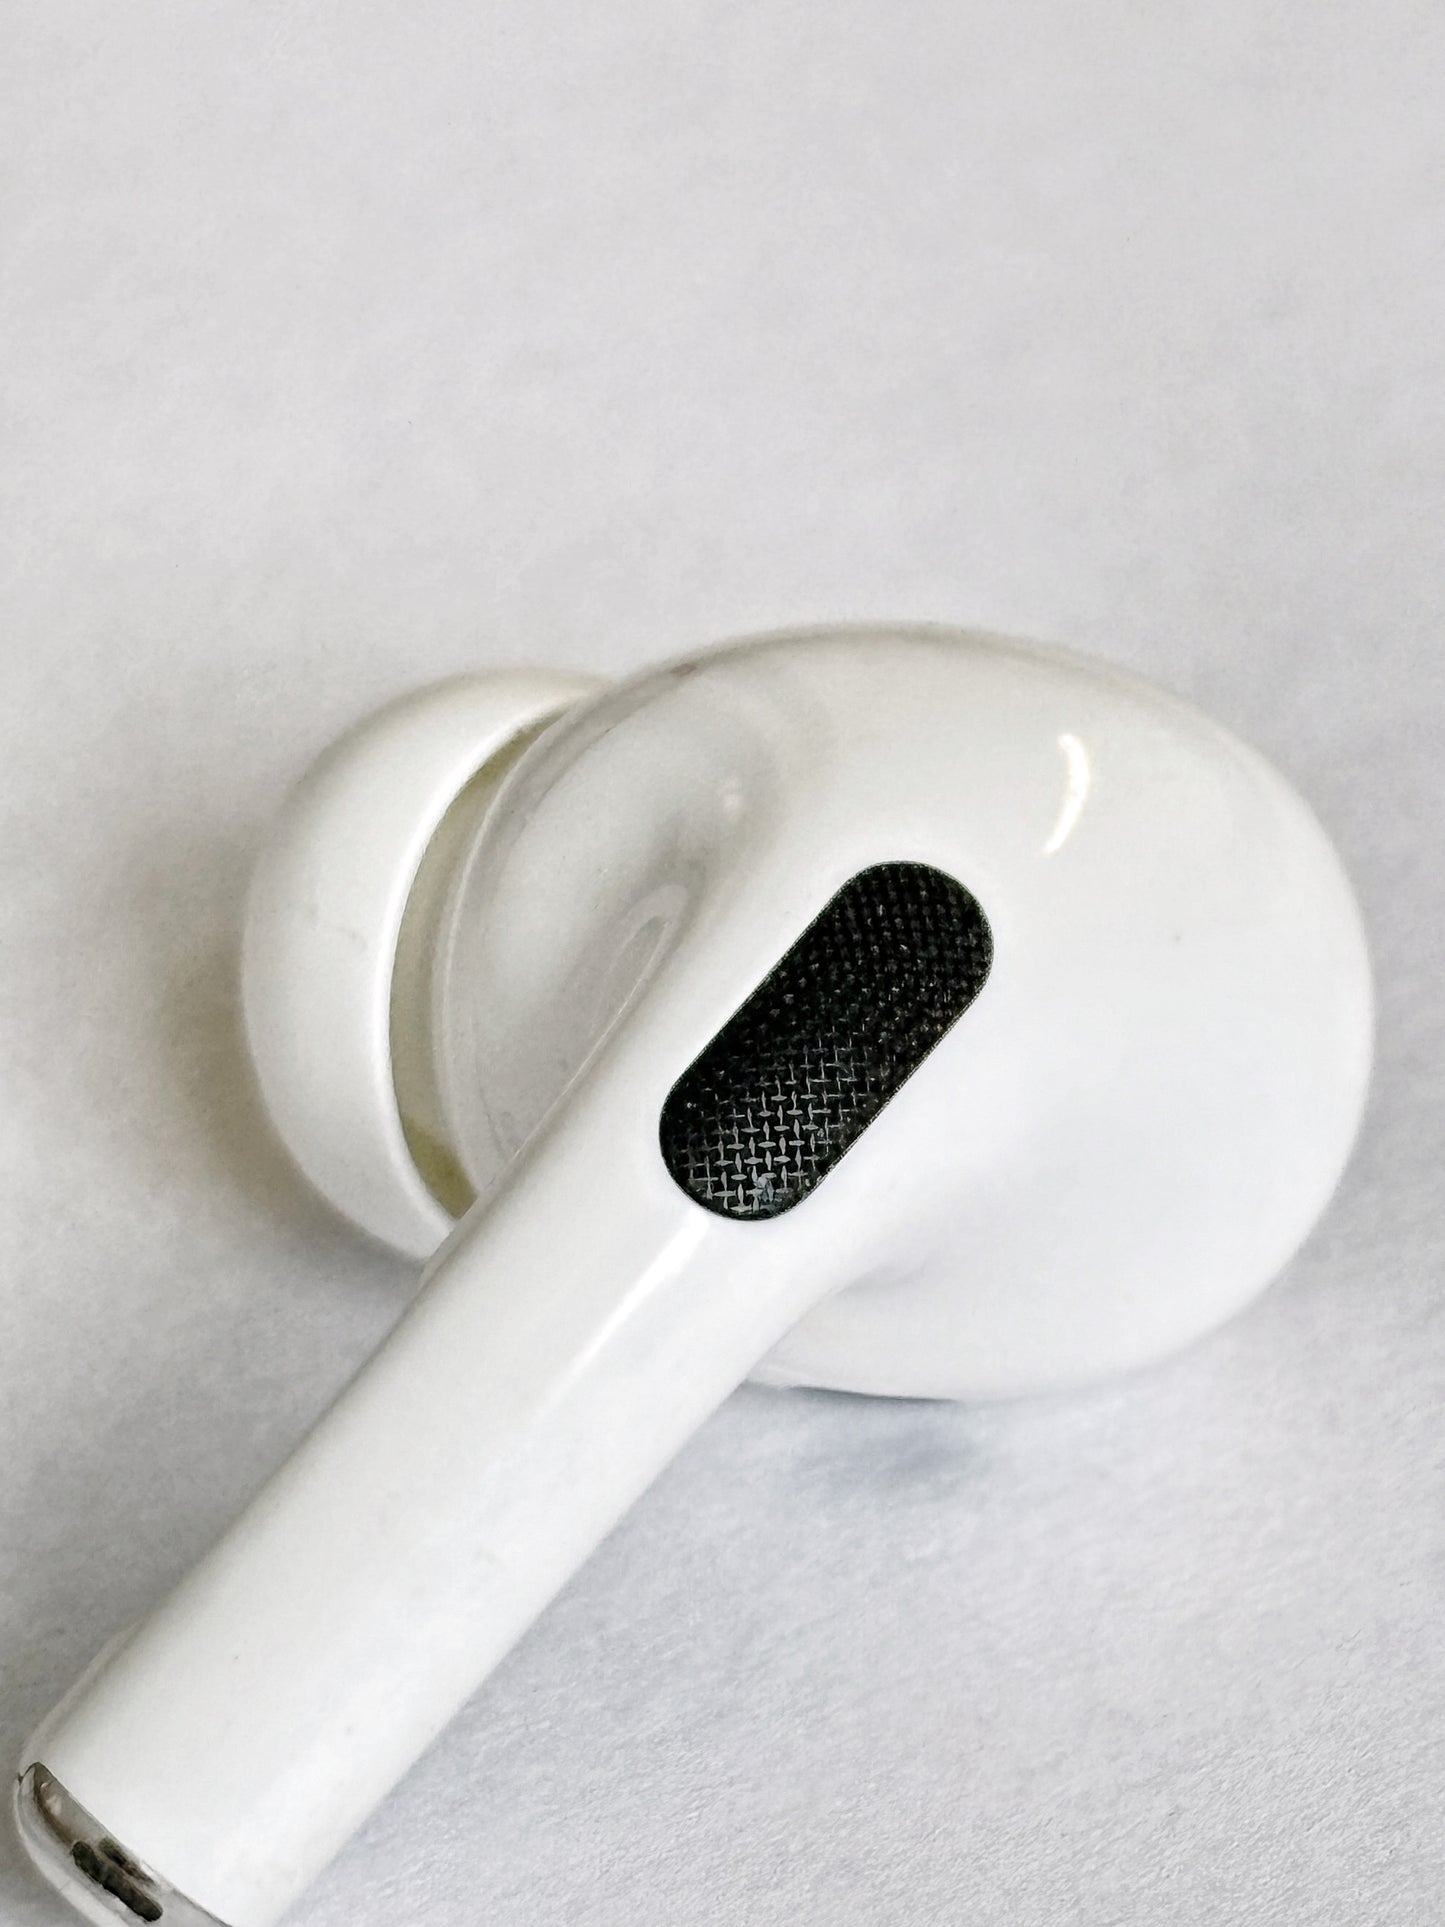 Apple AirPods Pro 1. Generation A2084 links Refurbished